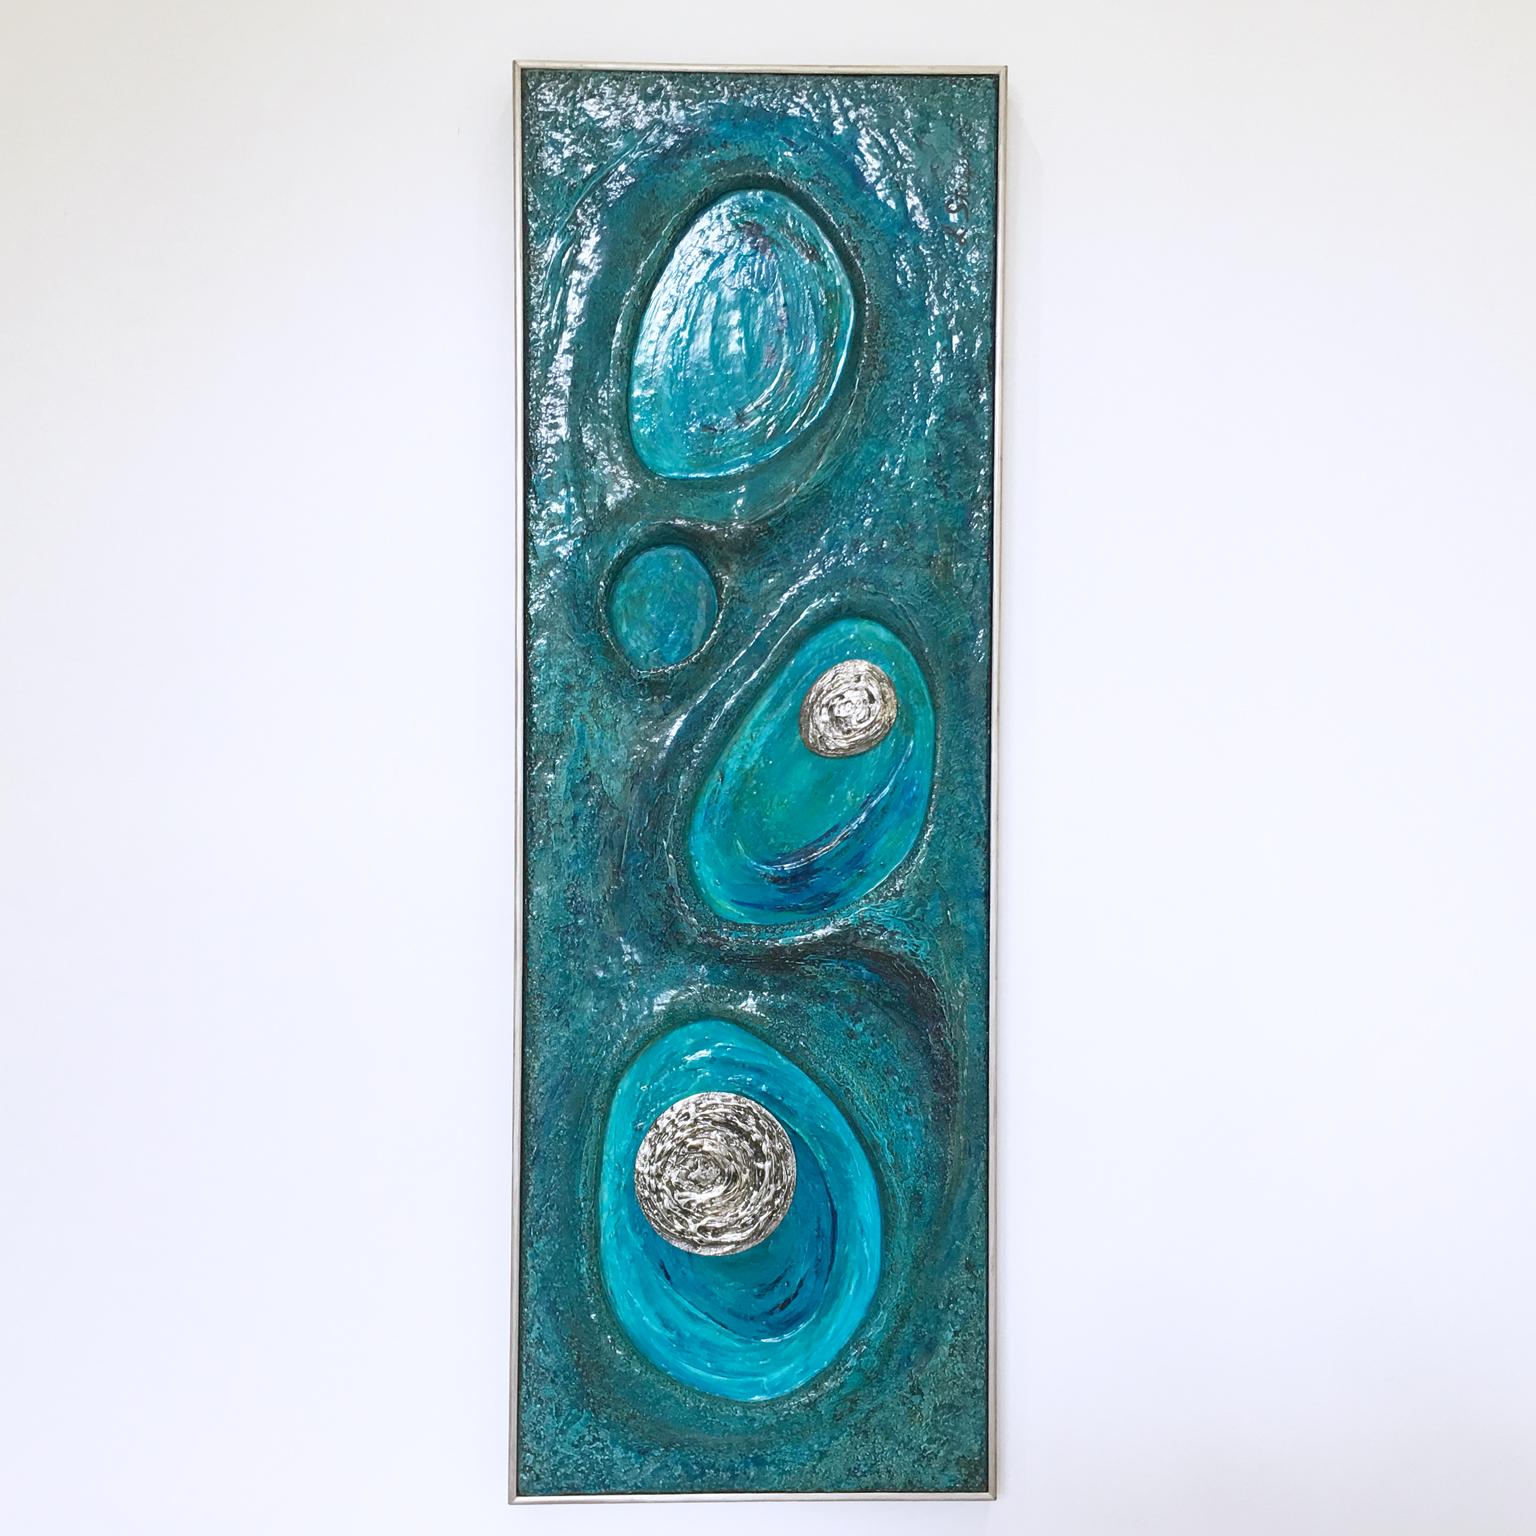 Psychedelic Turquoise Acrylic Resin Art Wall Sculpture Panel by Lorraine Stelzer For Sale 2